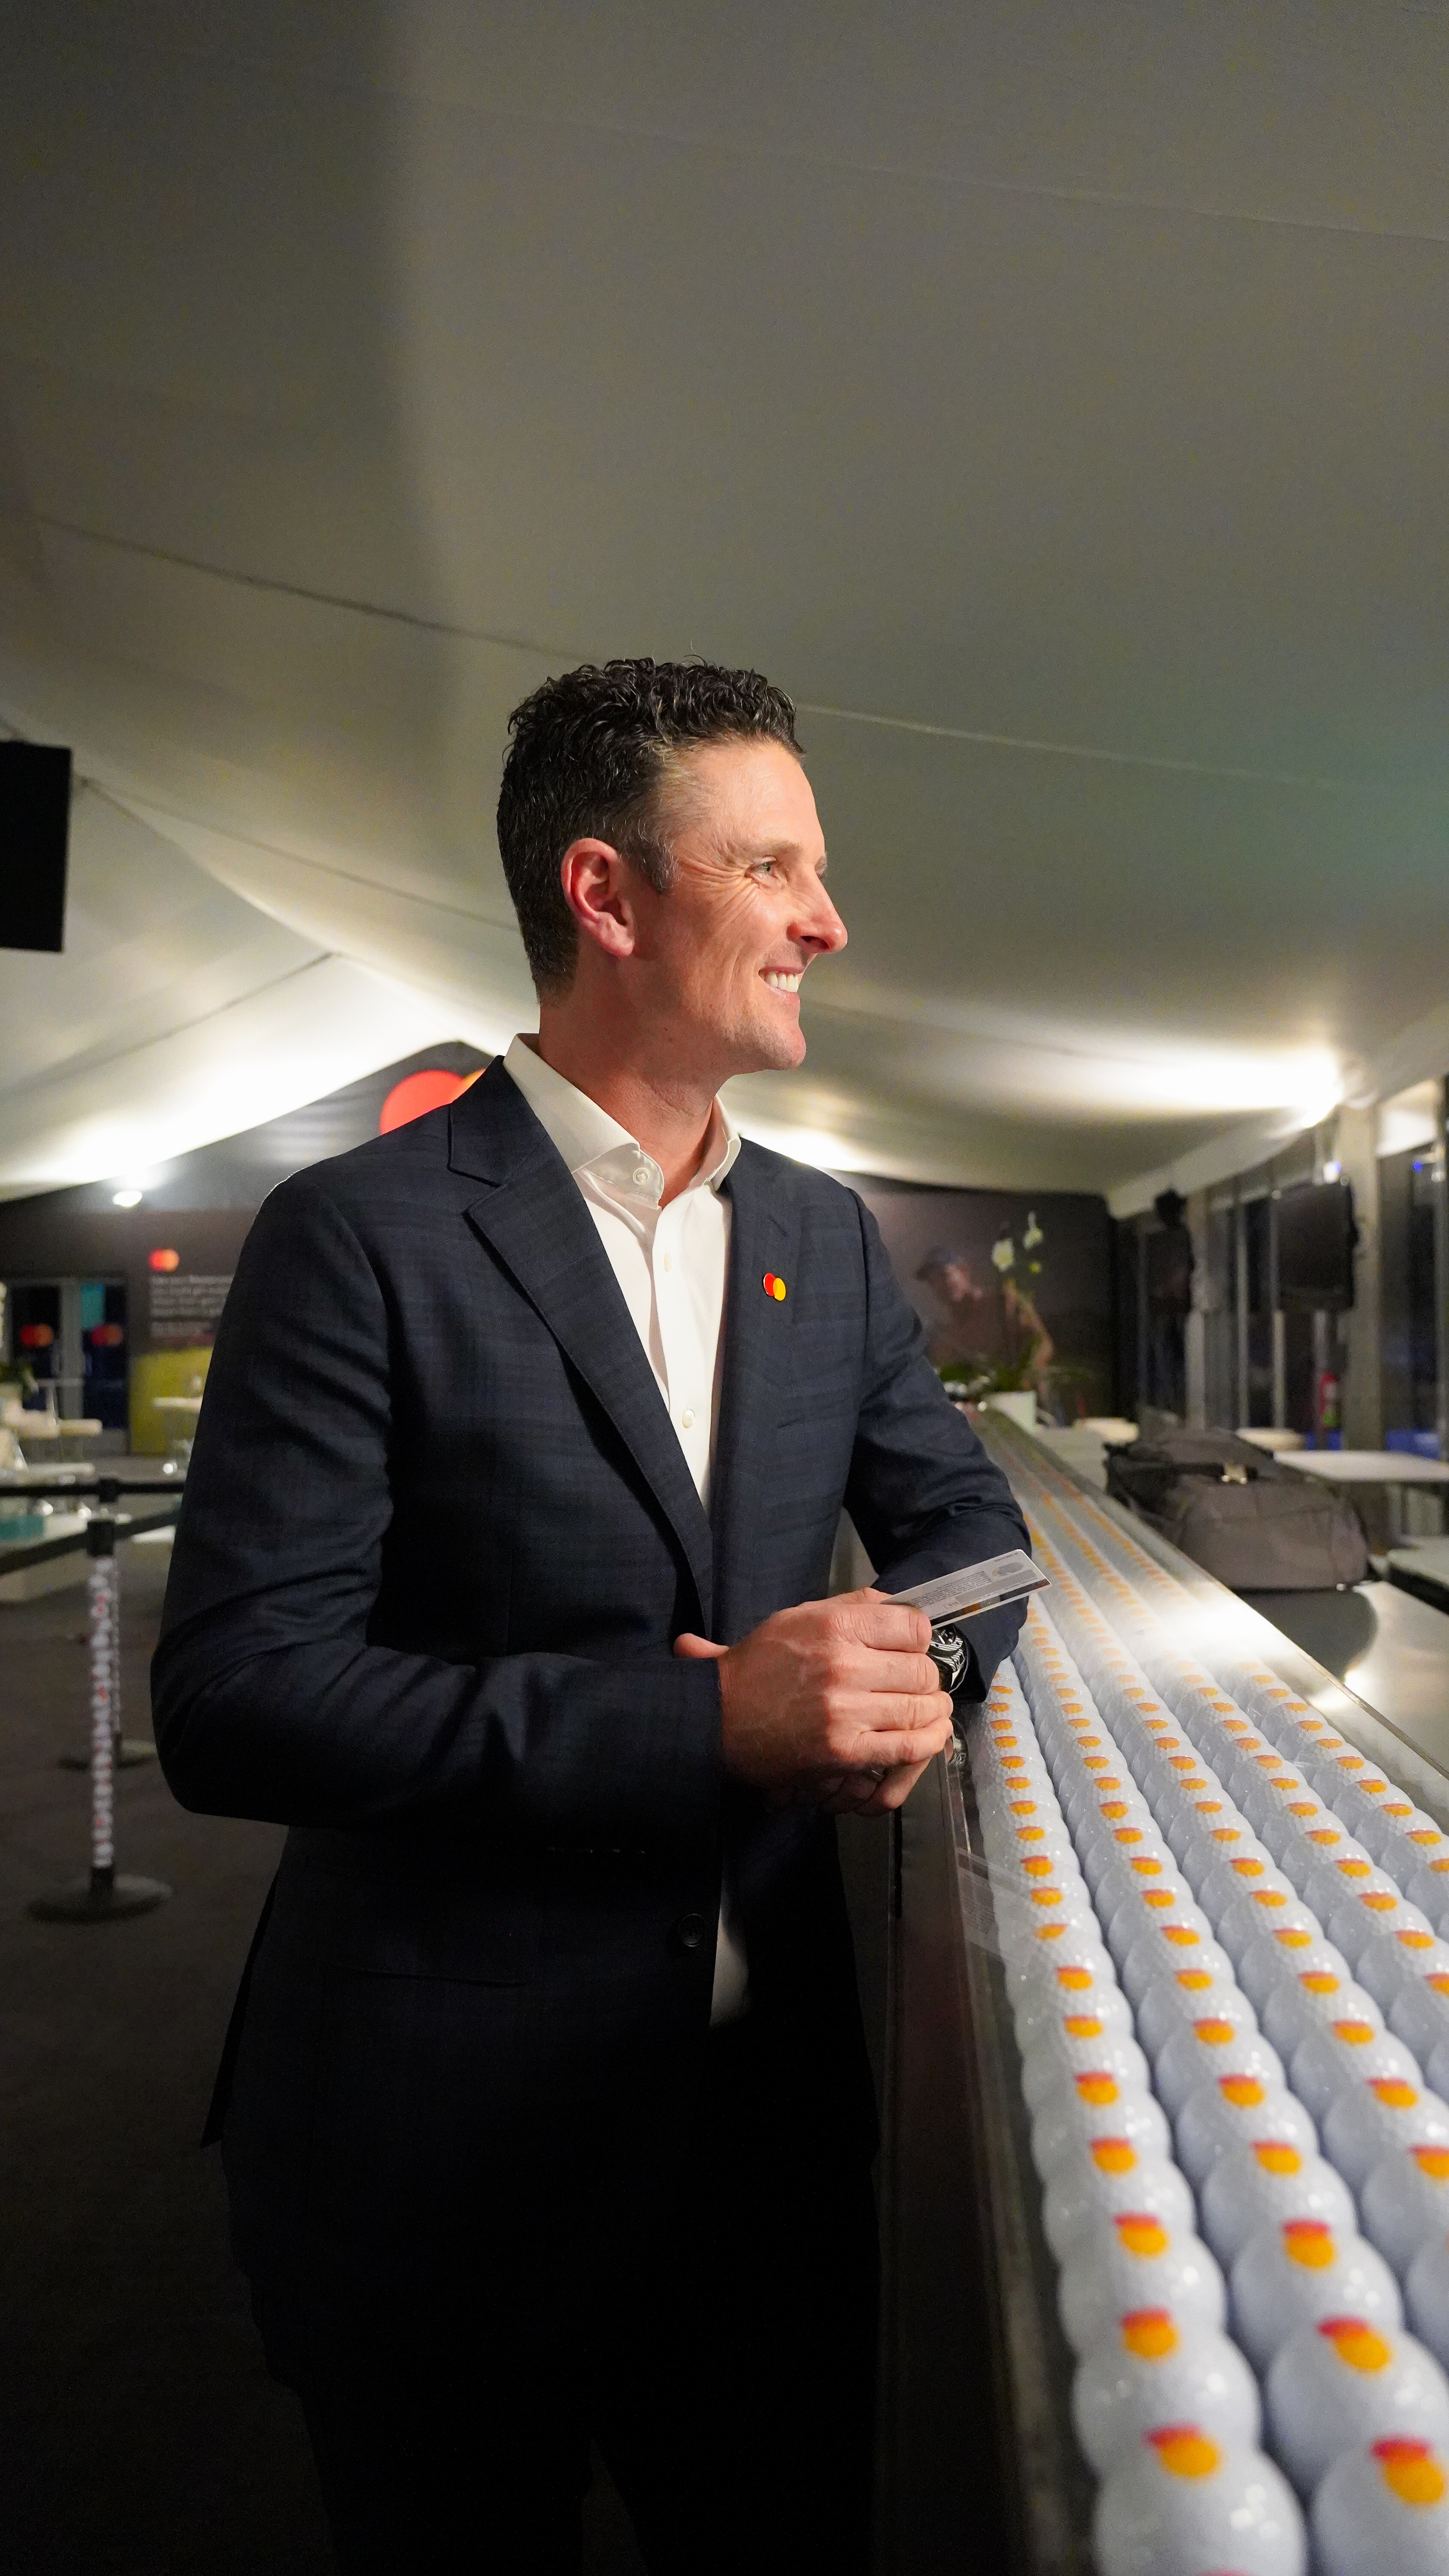 Mastercard's sonic brand sounds off as Justin Rose taps to pay at concessions at the Arnold Palmer Invitational presented by Mastercard